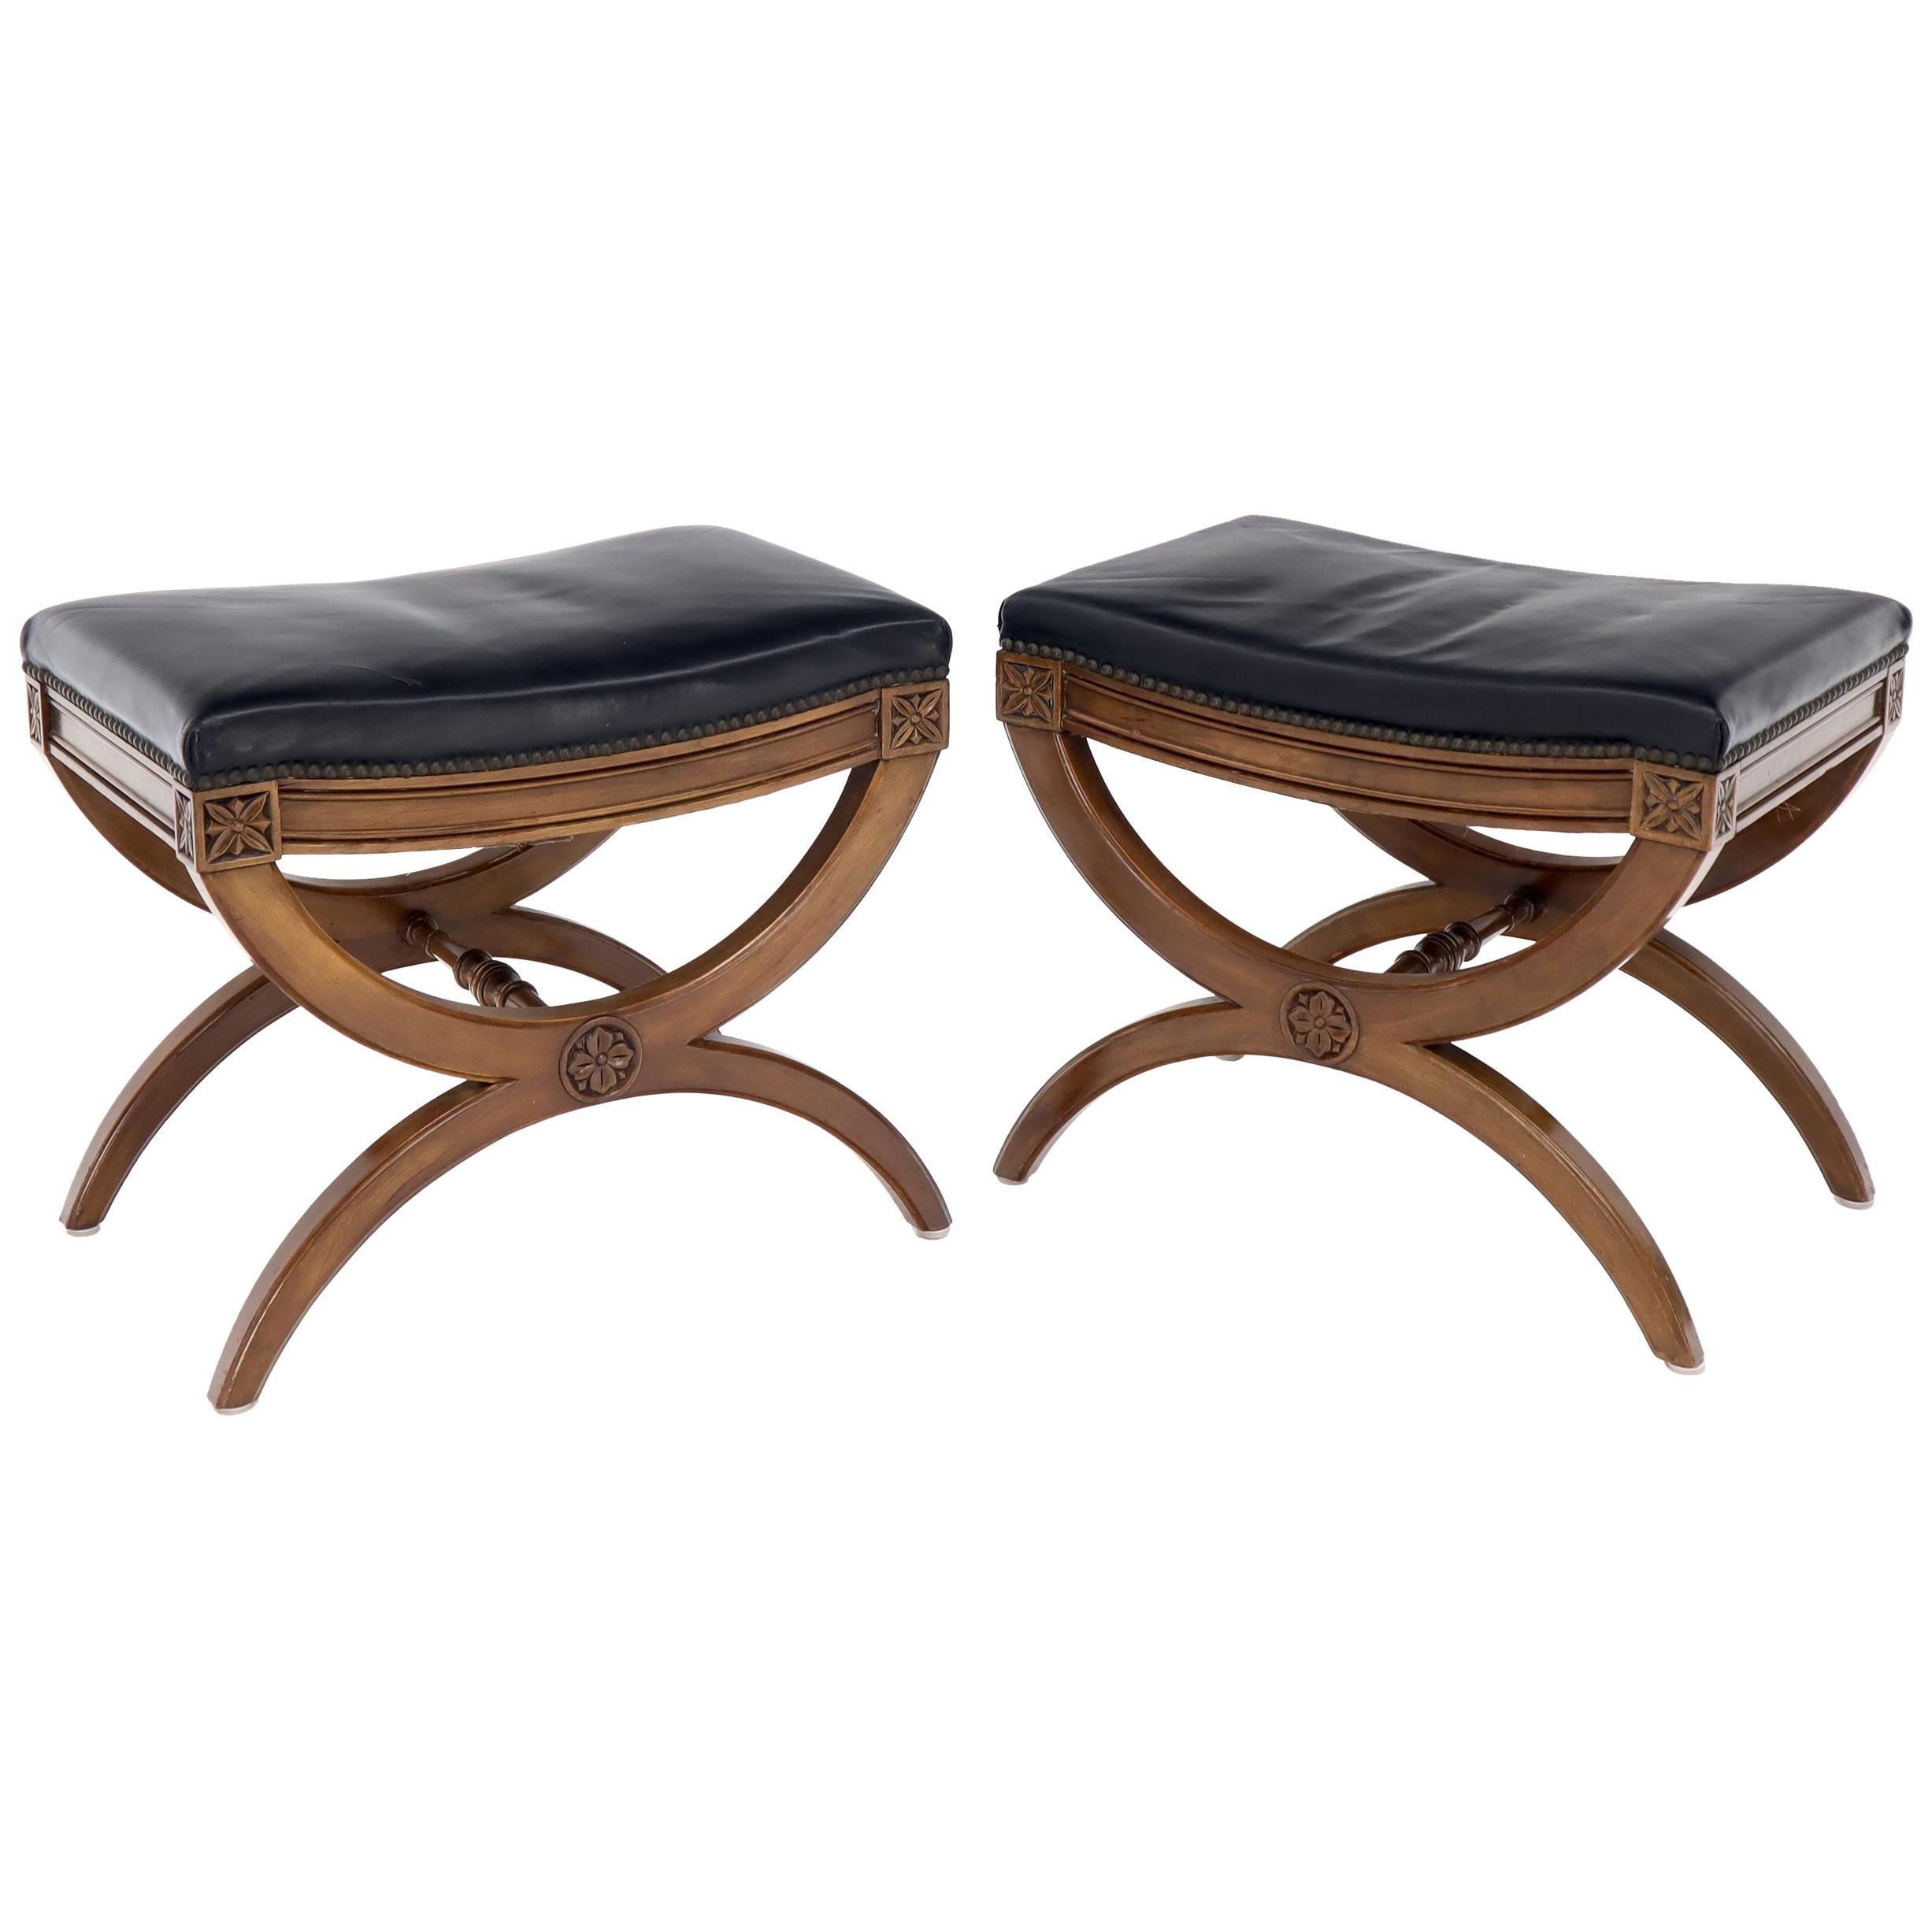 Pair of Black Leather X-Bases Benches Ottomans Foot Stools by Kindel